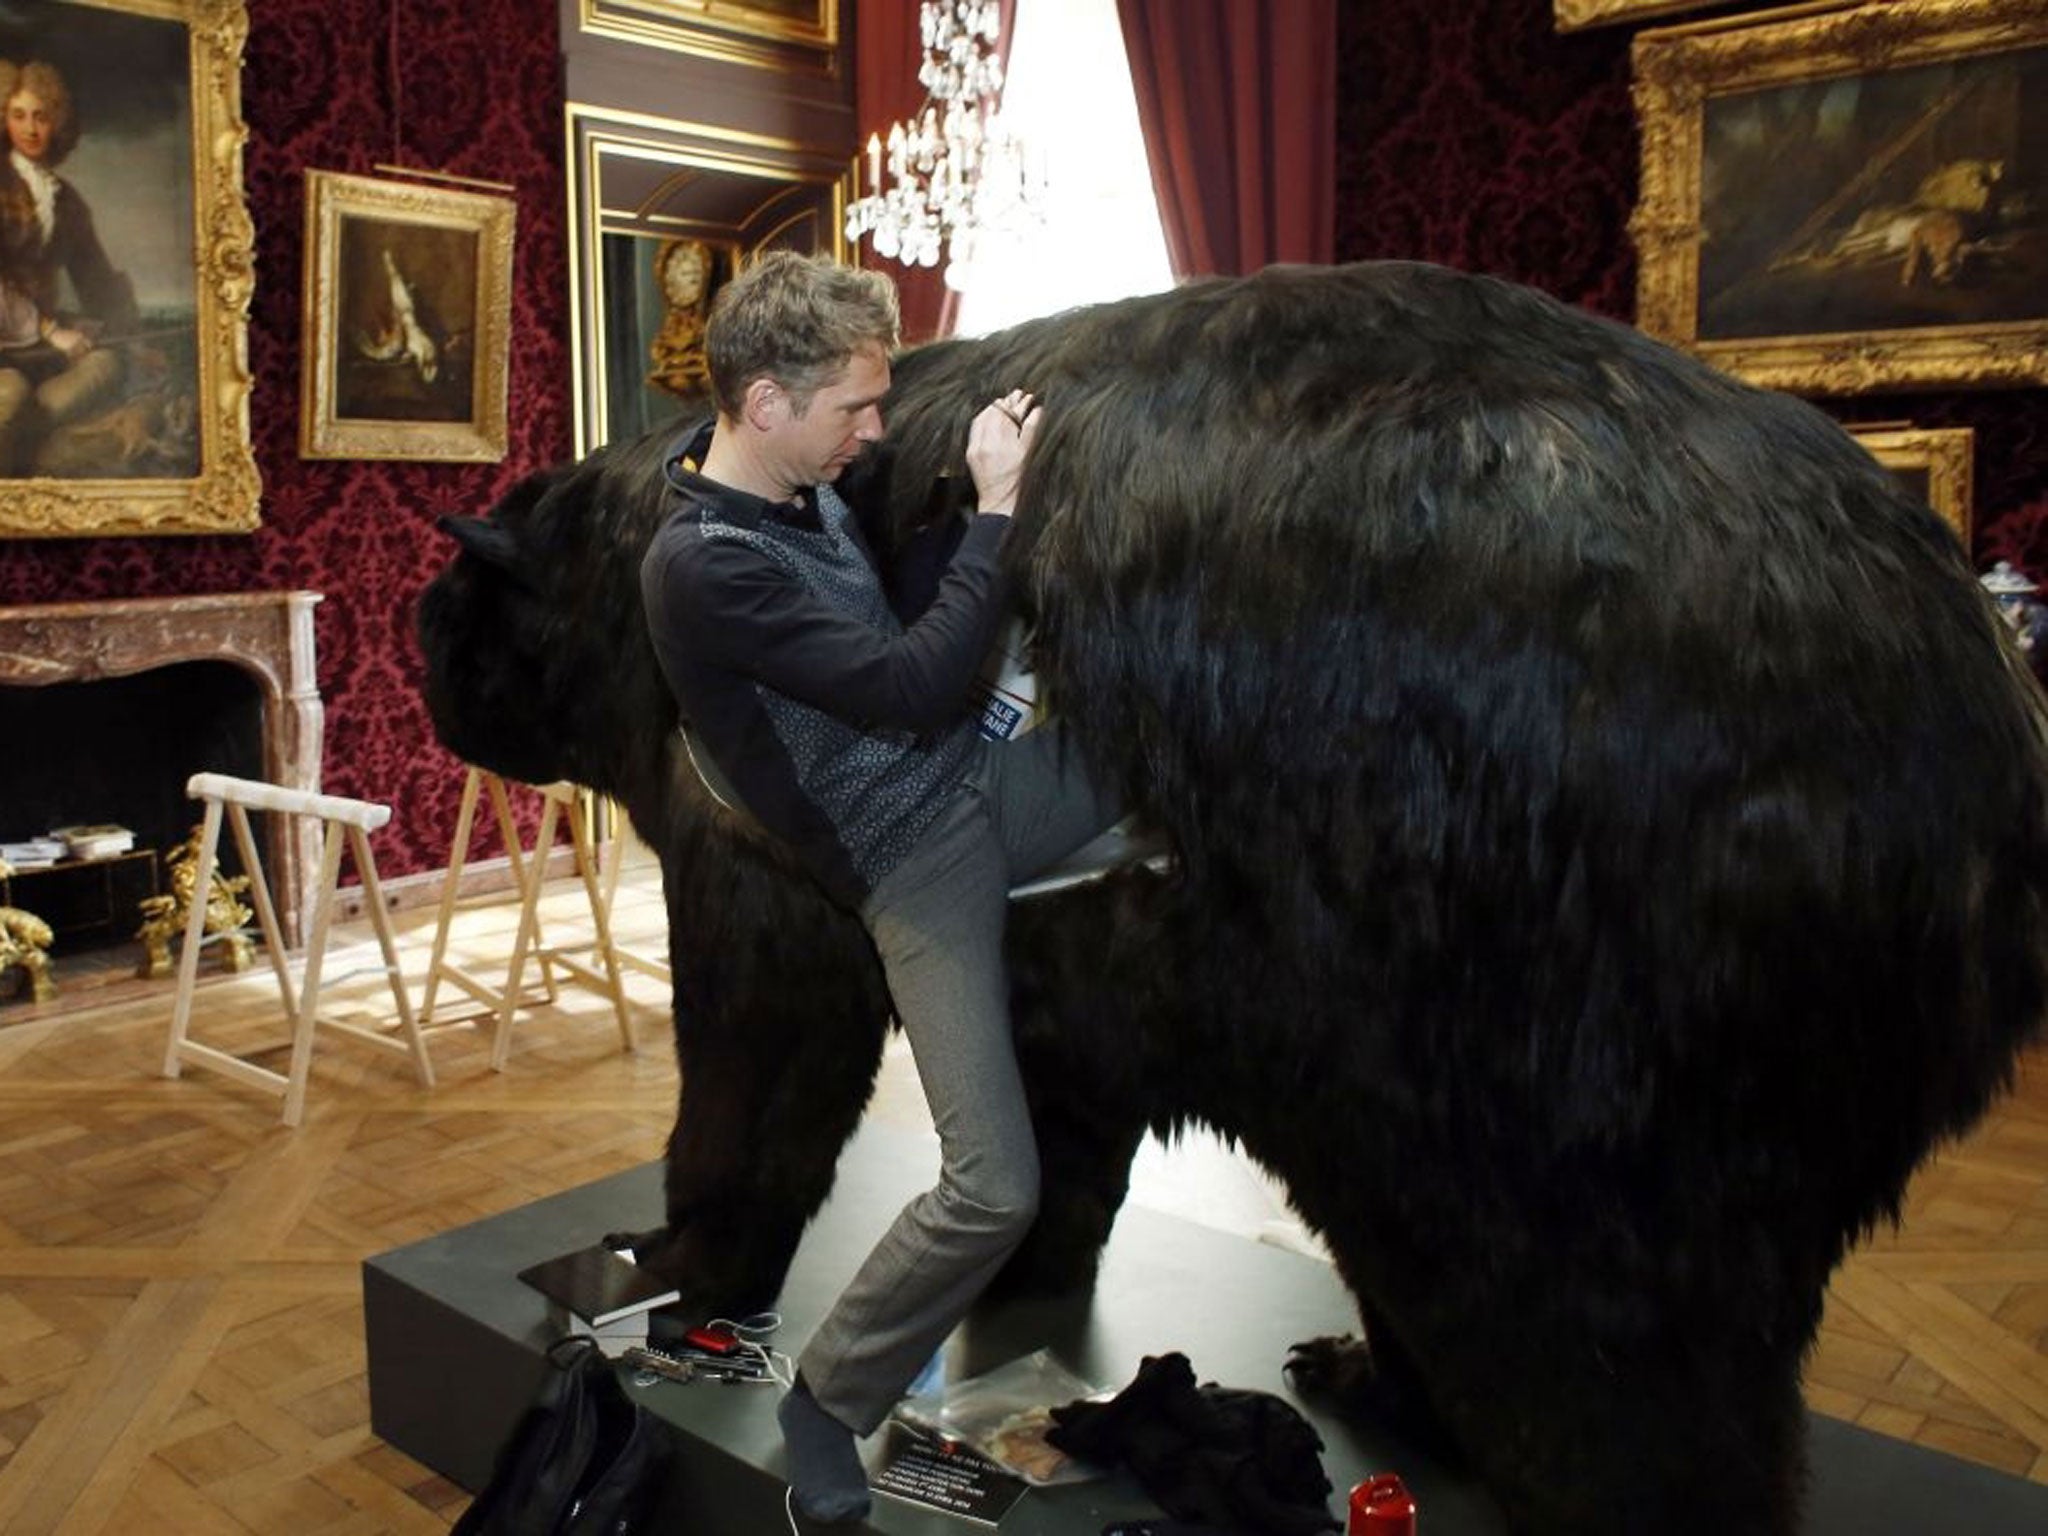 French artist Abraham Poincheval climbs into a bear.